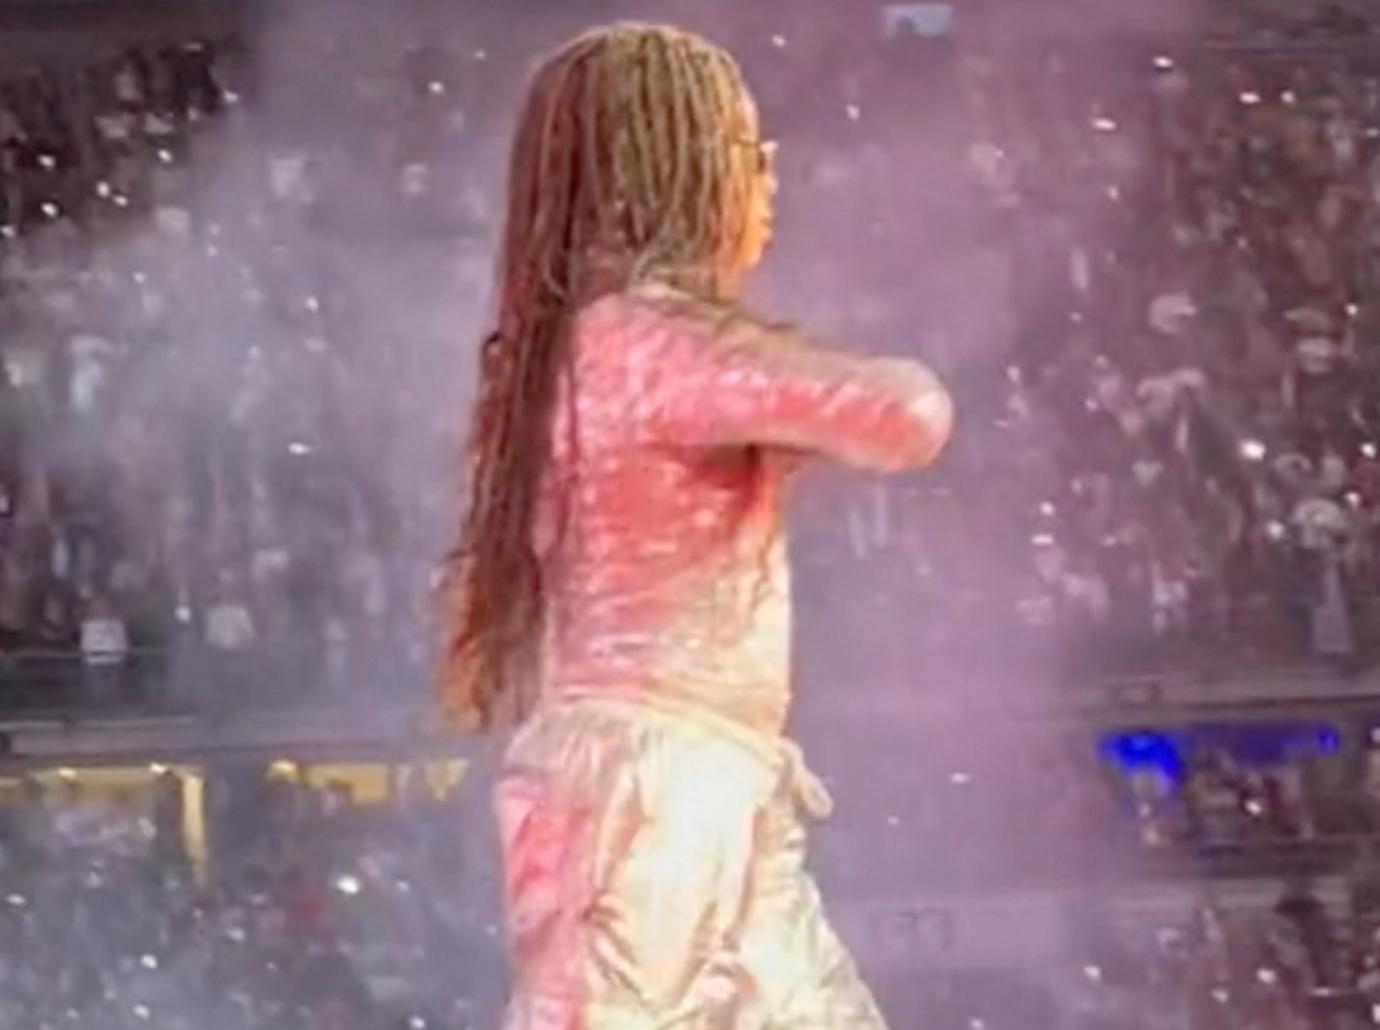 Beyoncé's daughter Blue Ivy trained harder after comments about  'lackluster' dance moves